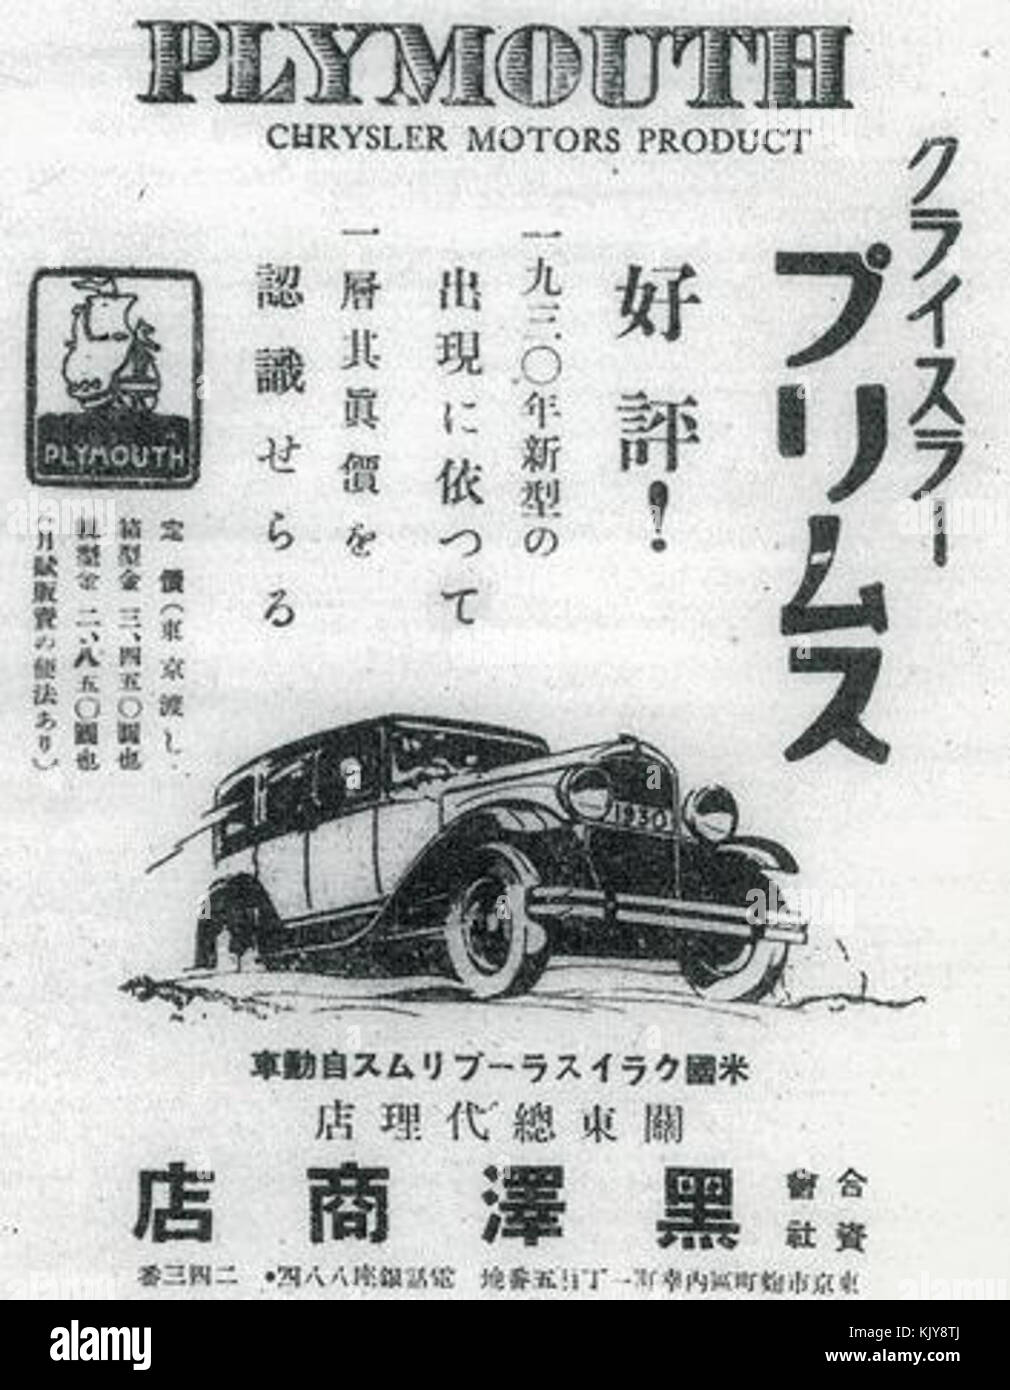 Plymouth car sold in japan 1930s ad Stock Photo